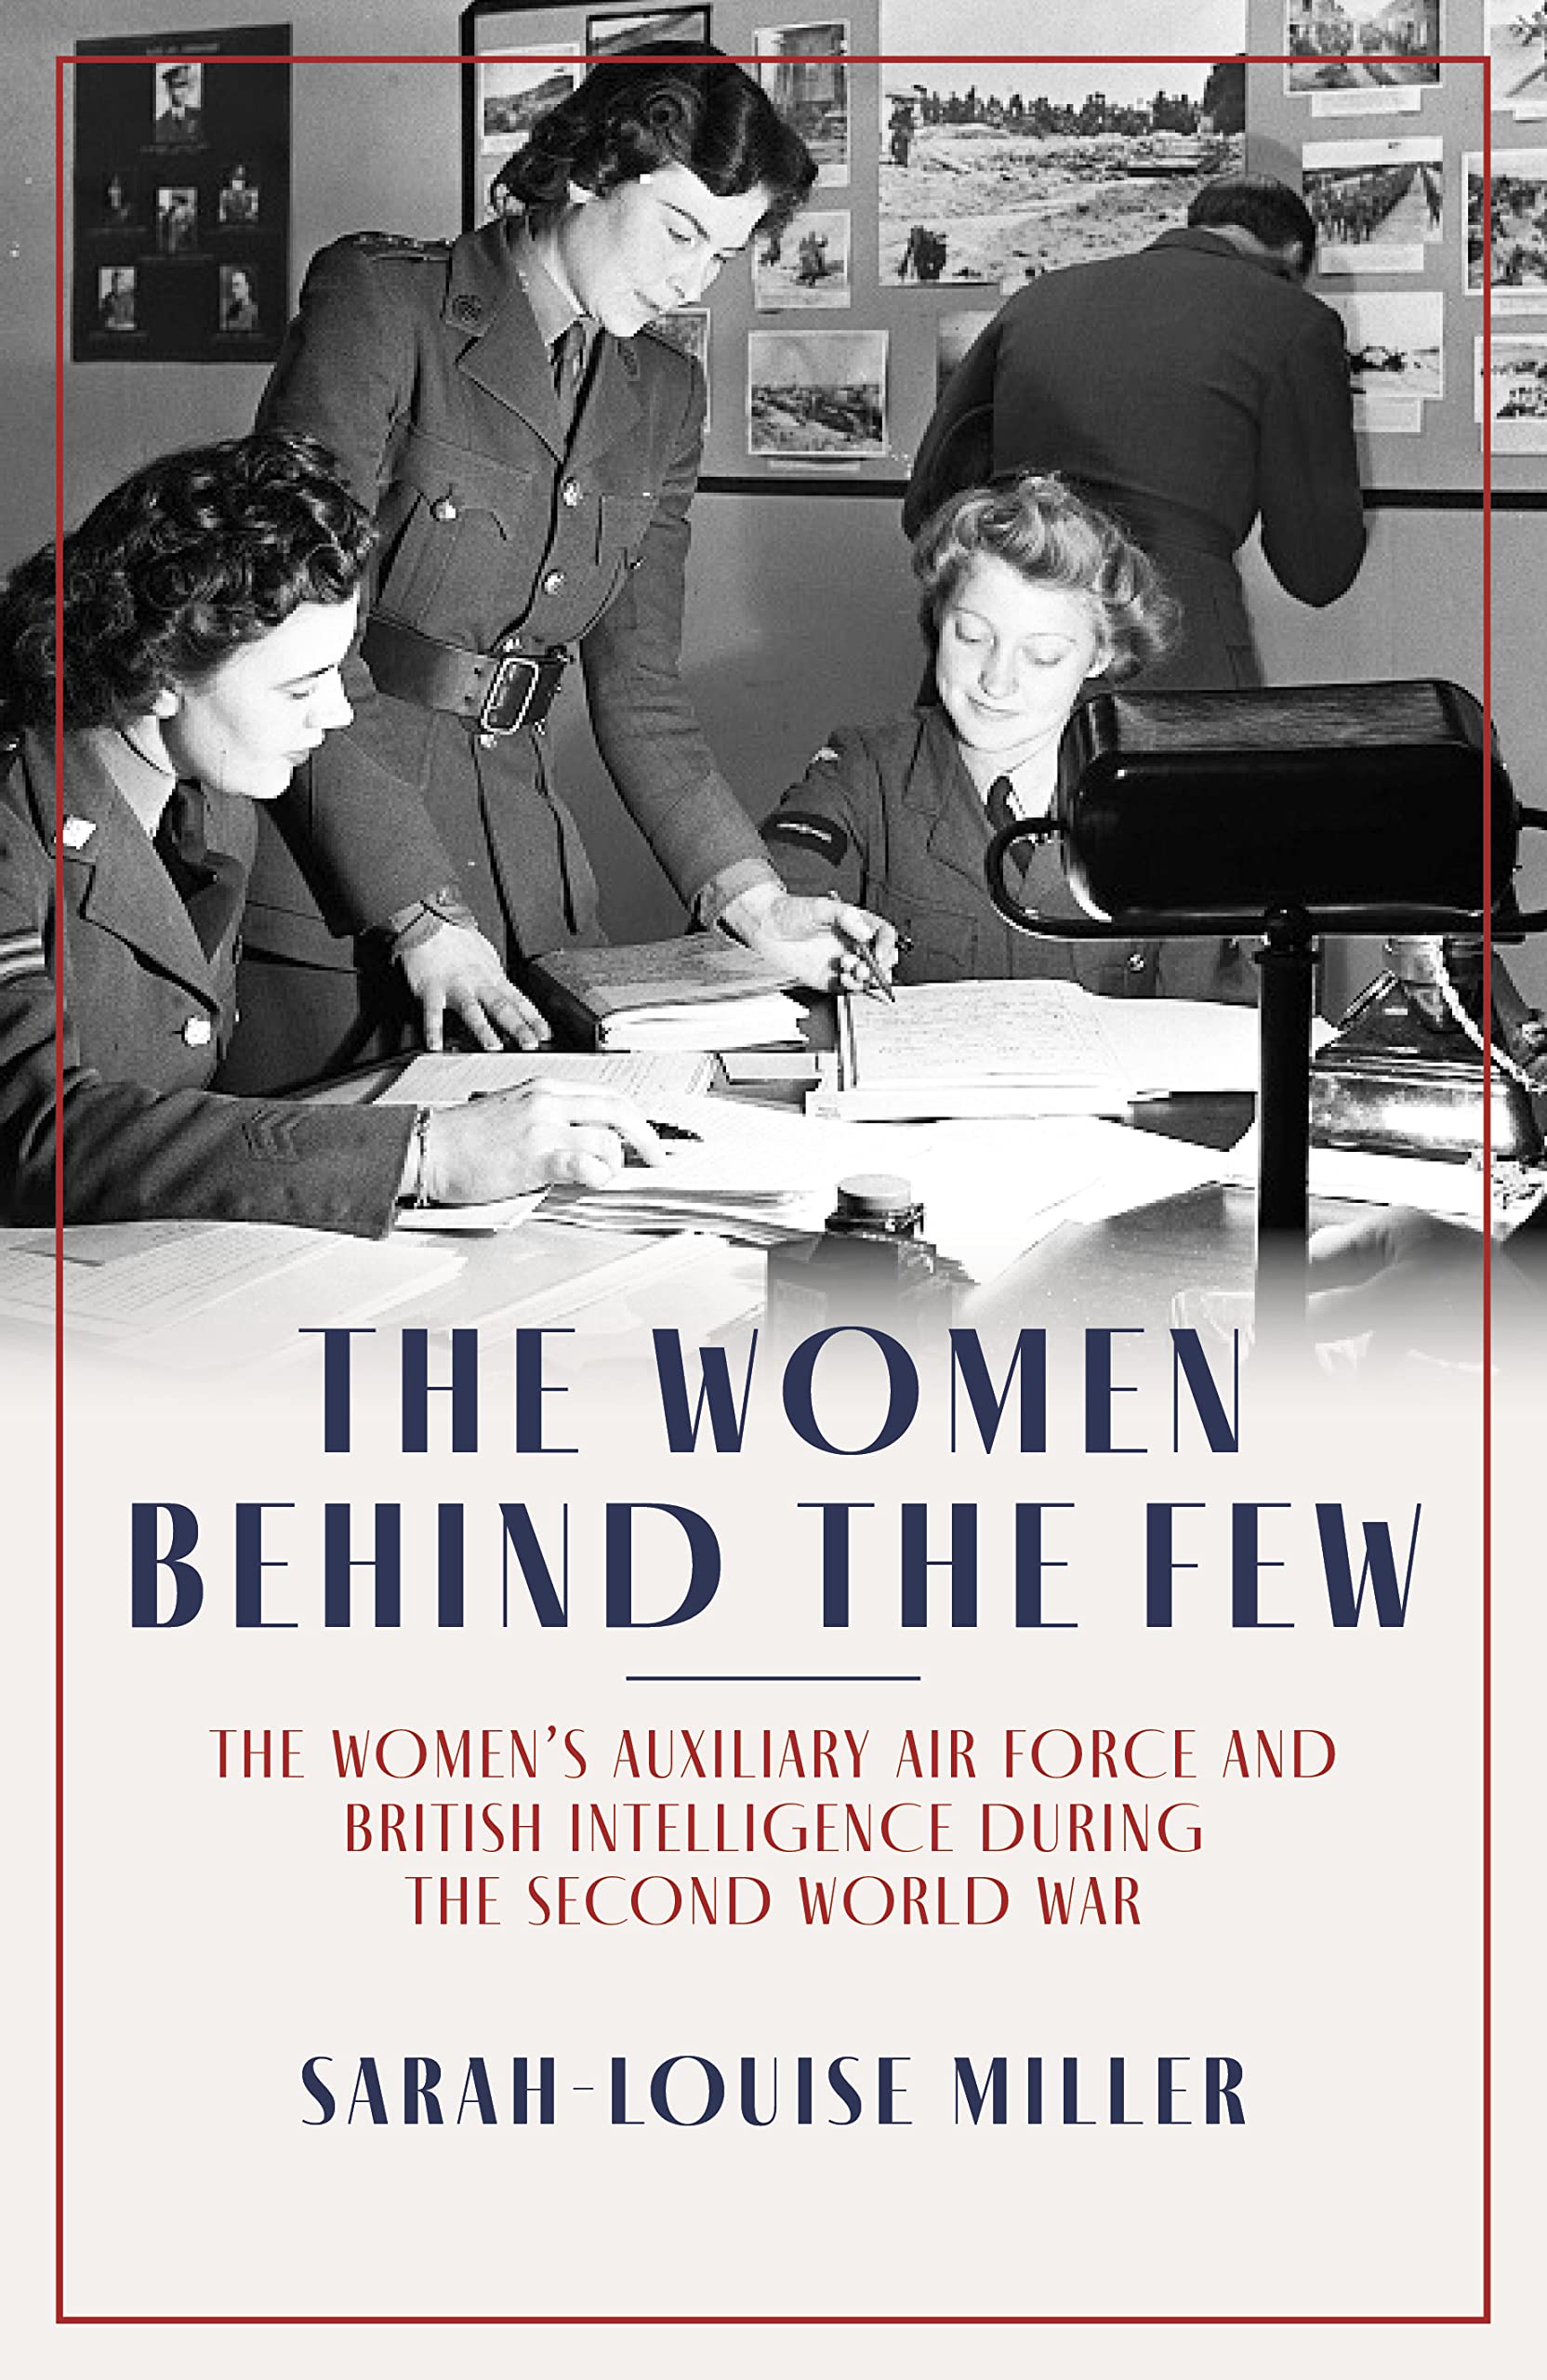 The_Women_Behind_The_Few paperback book cover